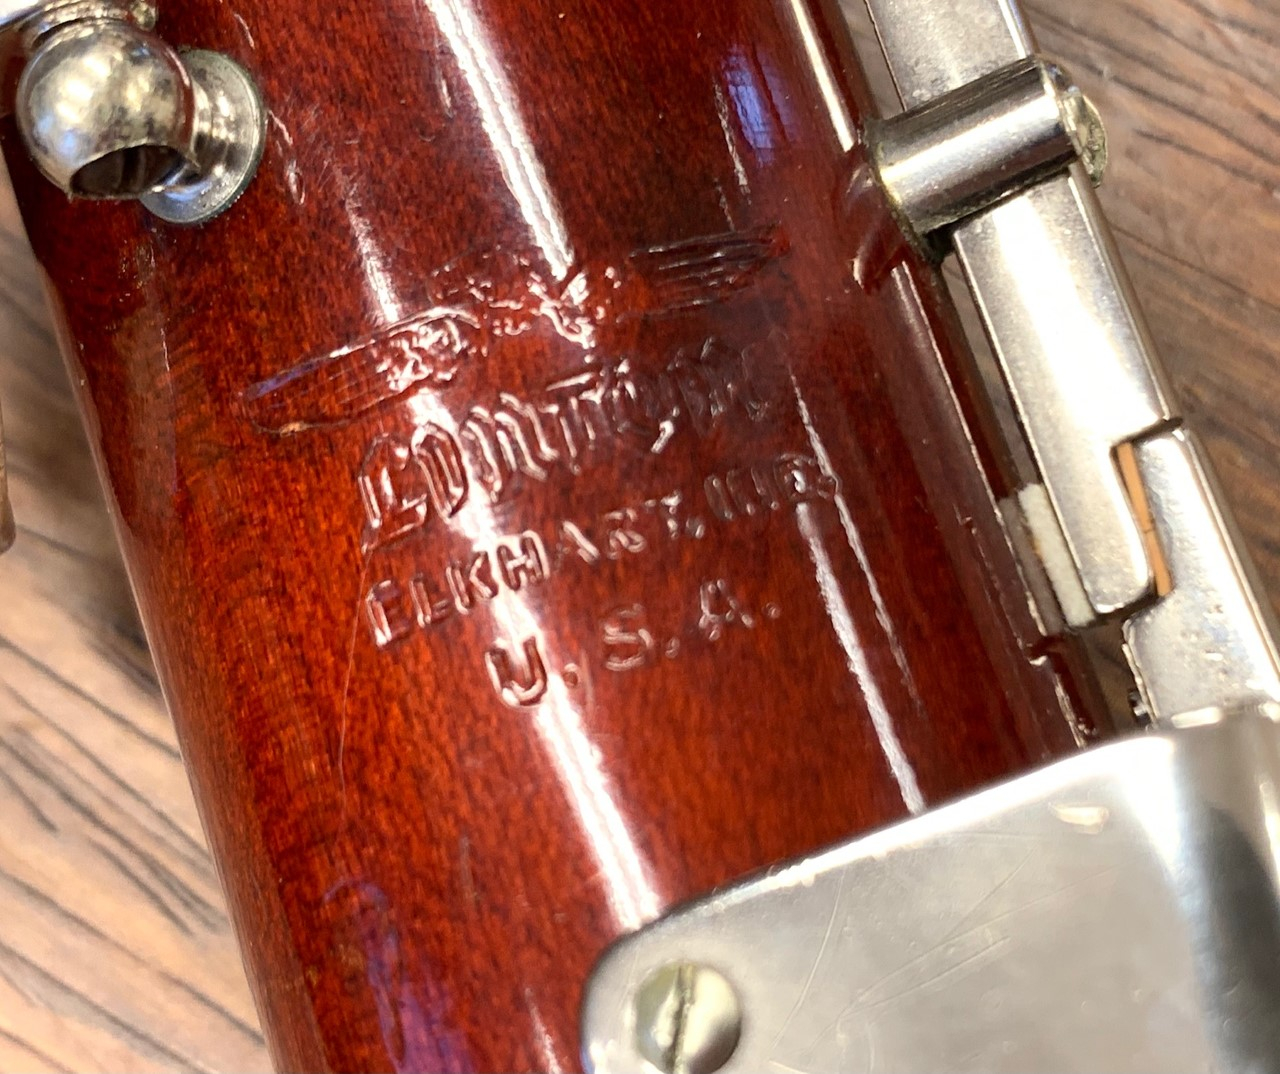 Pre-Owned Schreiber (Linton) Bassoon I Nr. 6196